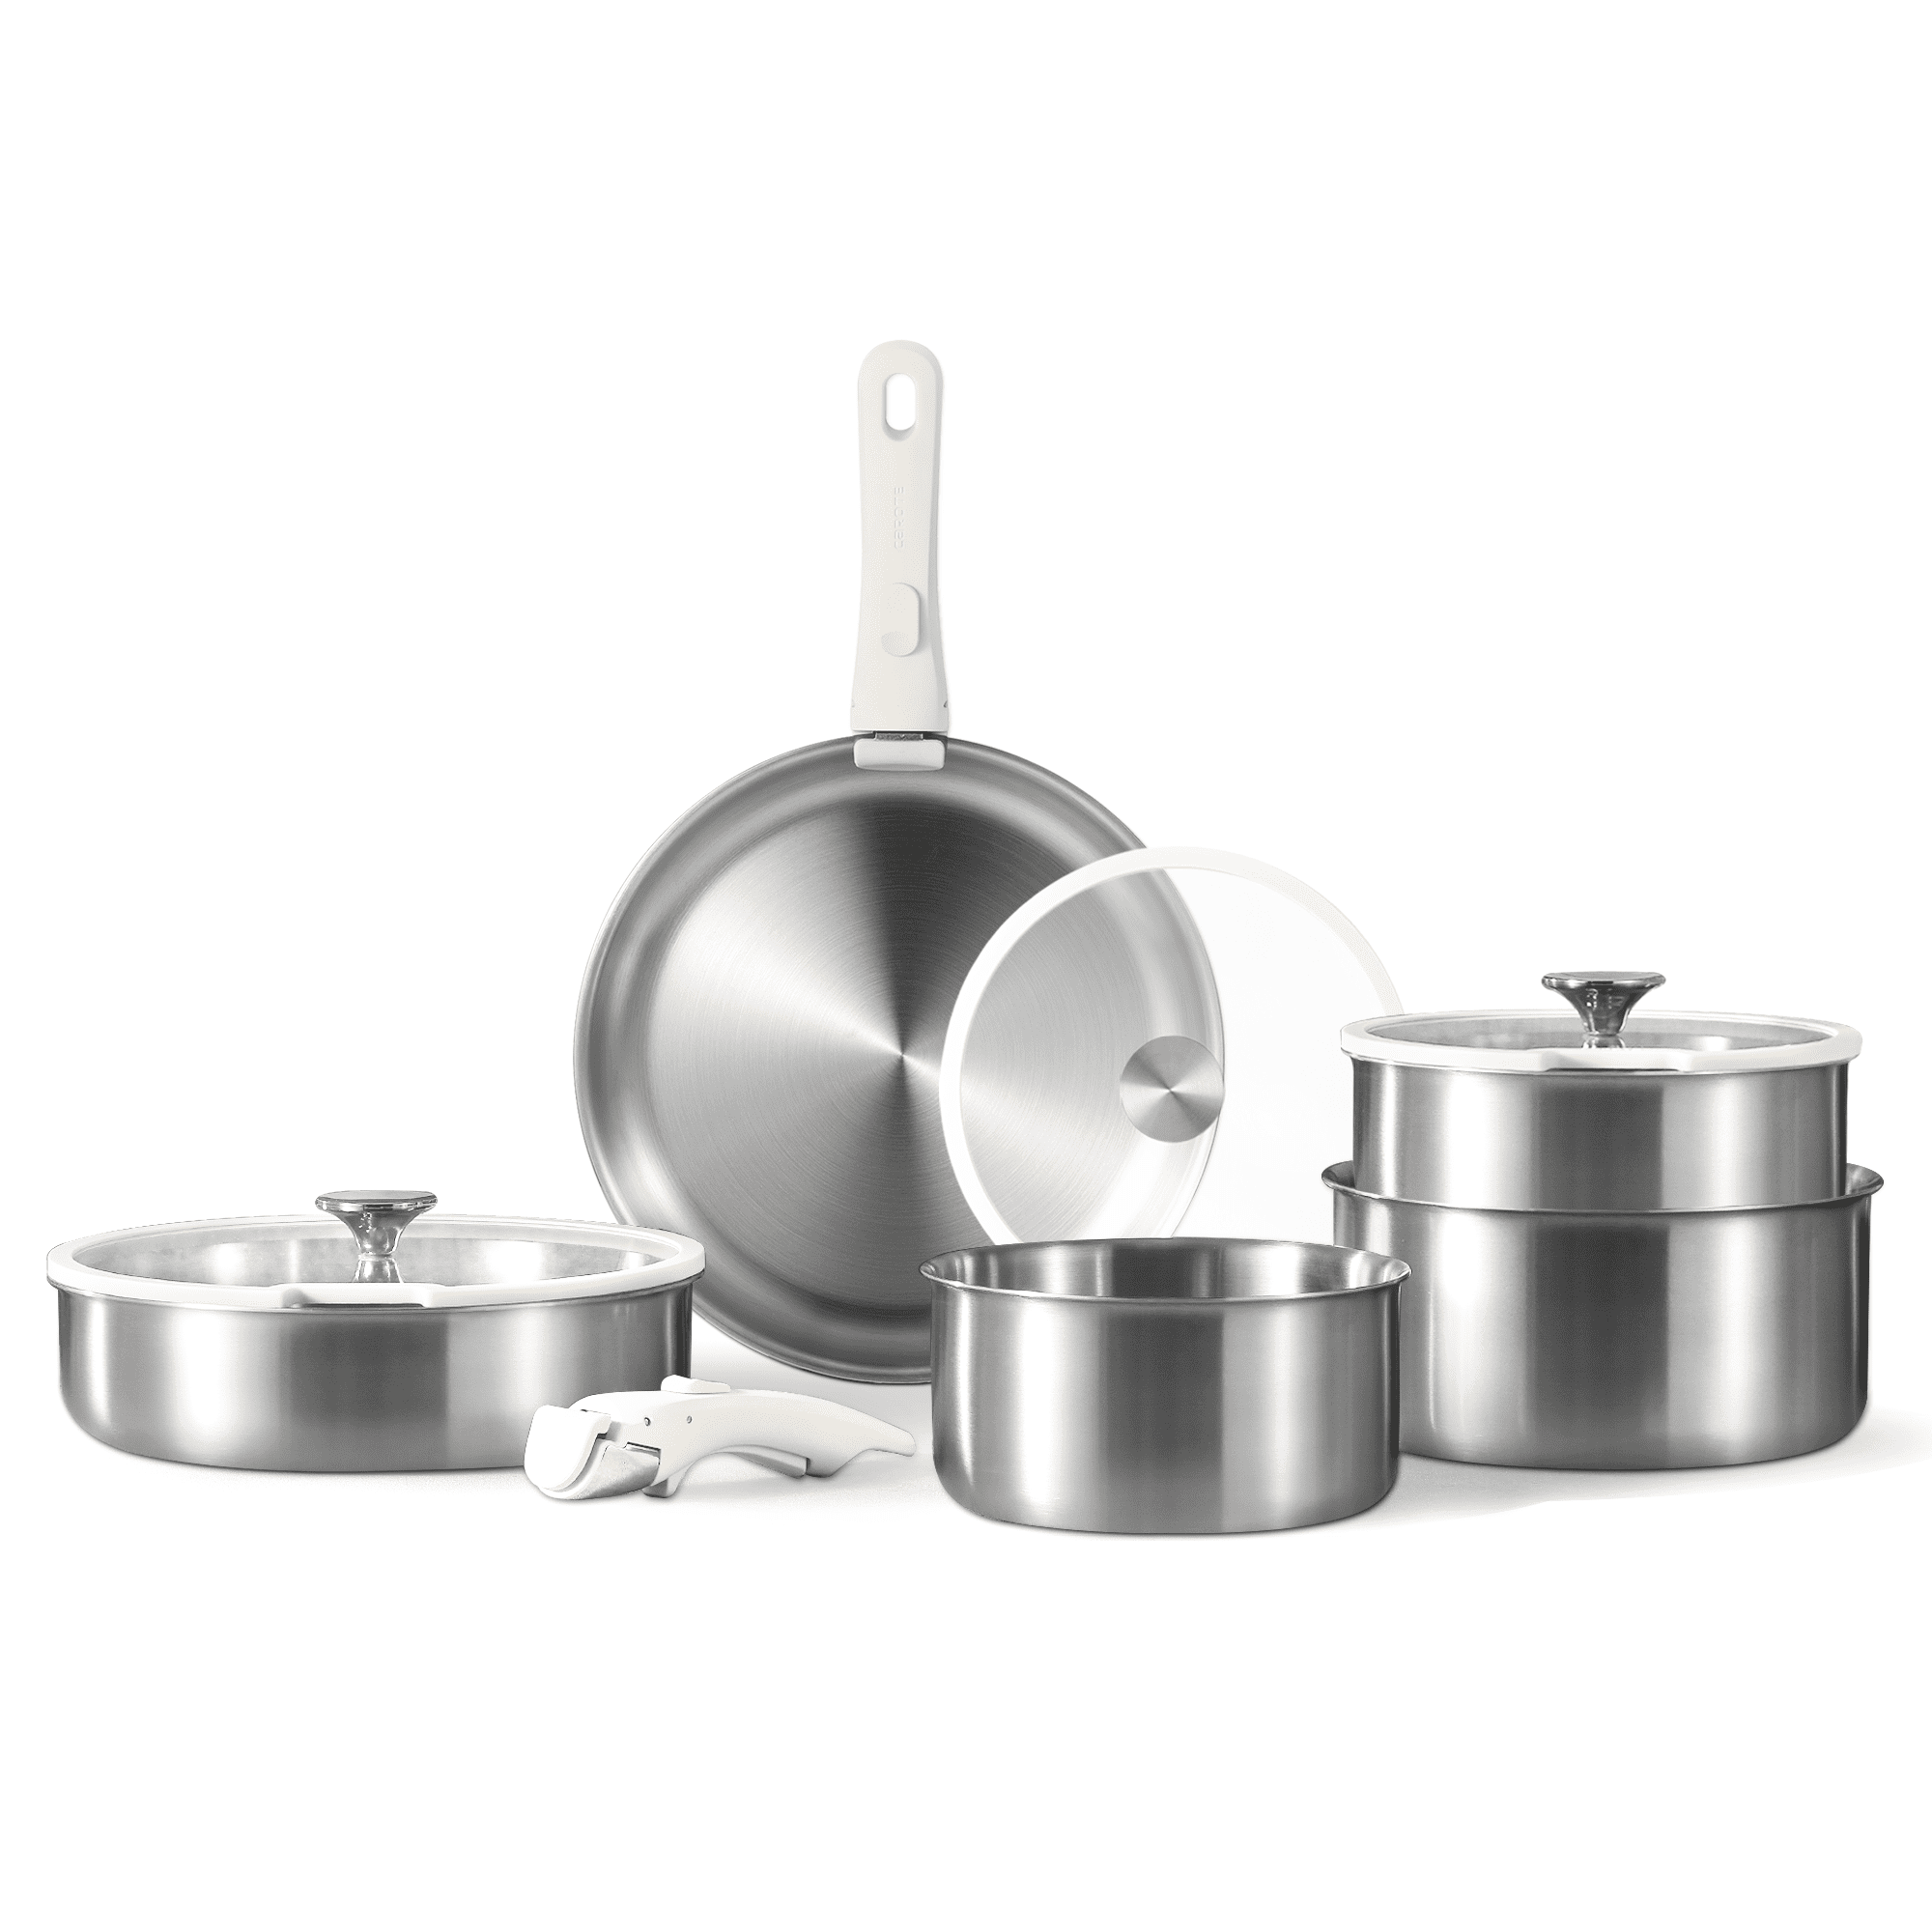 CAROTE-Stainless-Steel-Pots-Pans-Set-Cookware-Set-Detachable-Handle-Induction-Kitchen-Sets-Removable-RV-Oven-Safe-Steel-12-piece_f8d52110-782d-443e-acac-cfa83f411e7a.a541ea31ea081462ccb2dd37f129469c.png?odnHeight=2000&odnWidth=2000&odnBg=FFFFFF